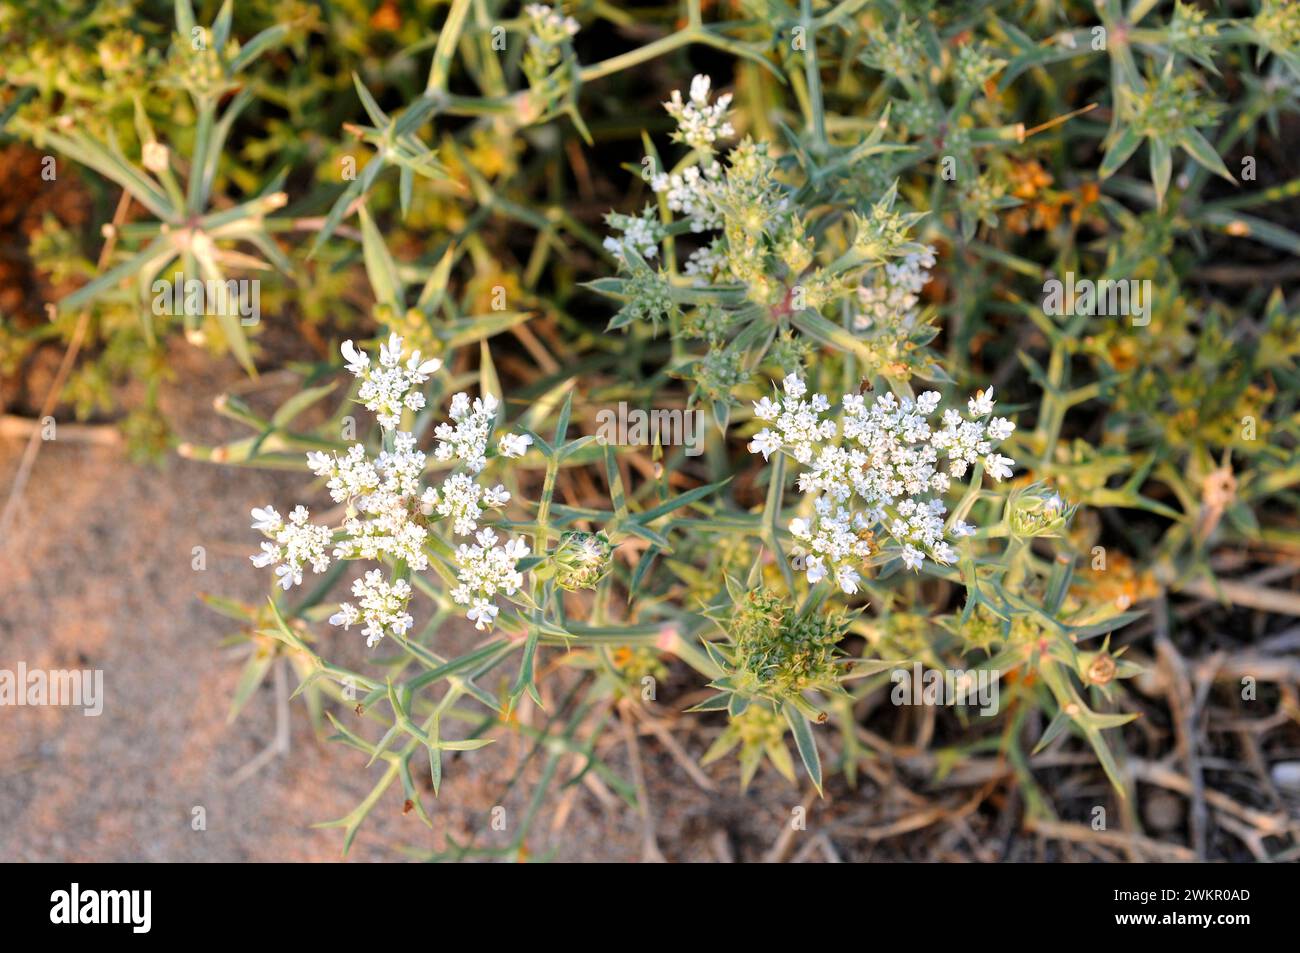 Prickly parsnip (Echiniphora spinosa) is a perennial plant native to sandy coasts of Mediterranean basin. This photo was taken in Cap Ras, Girona prov Stock Photo